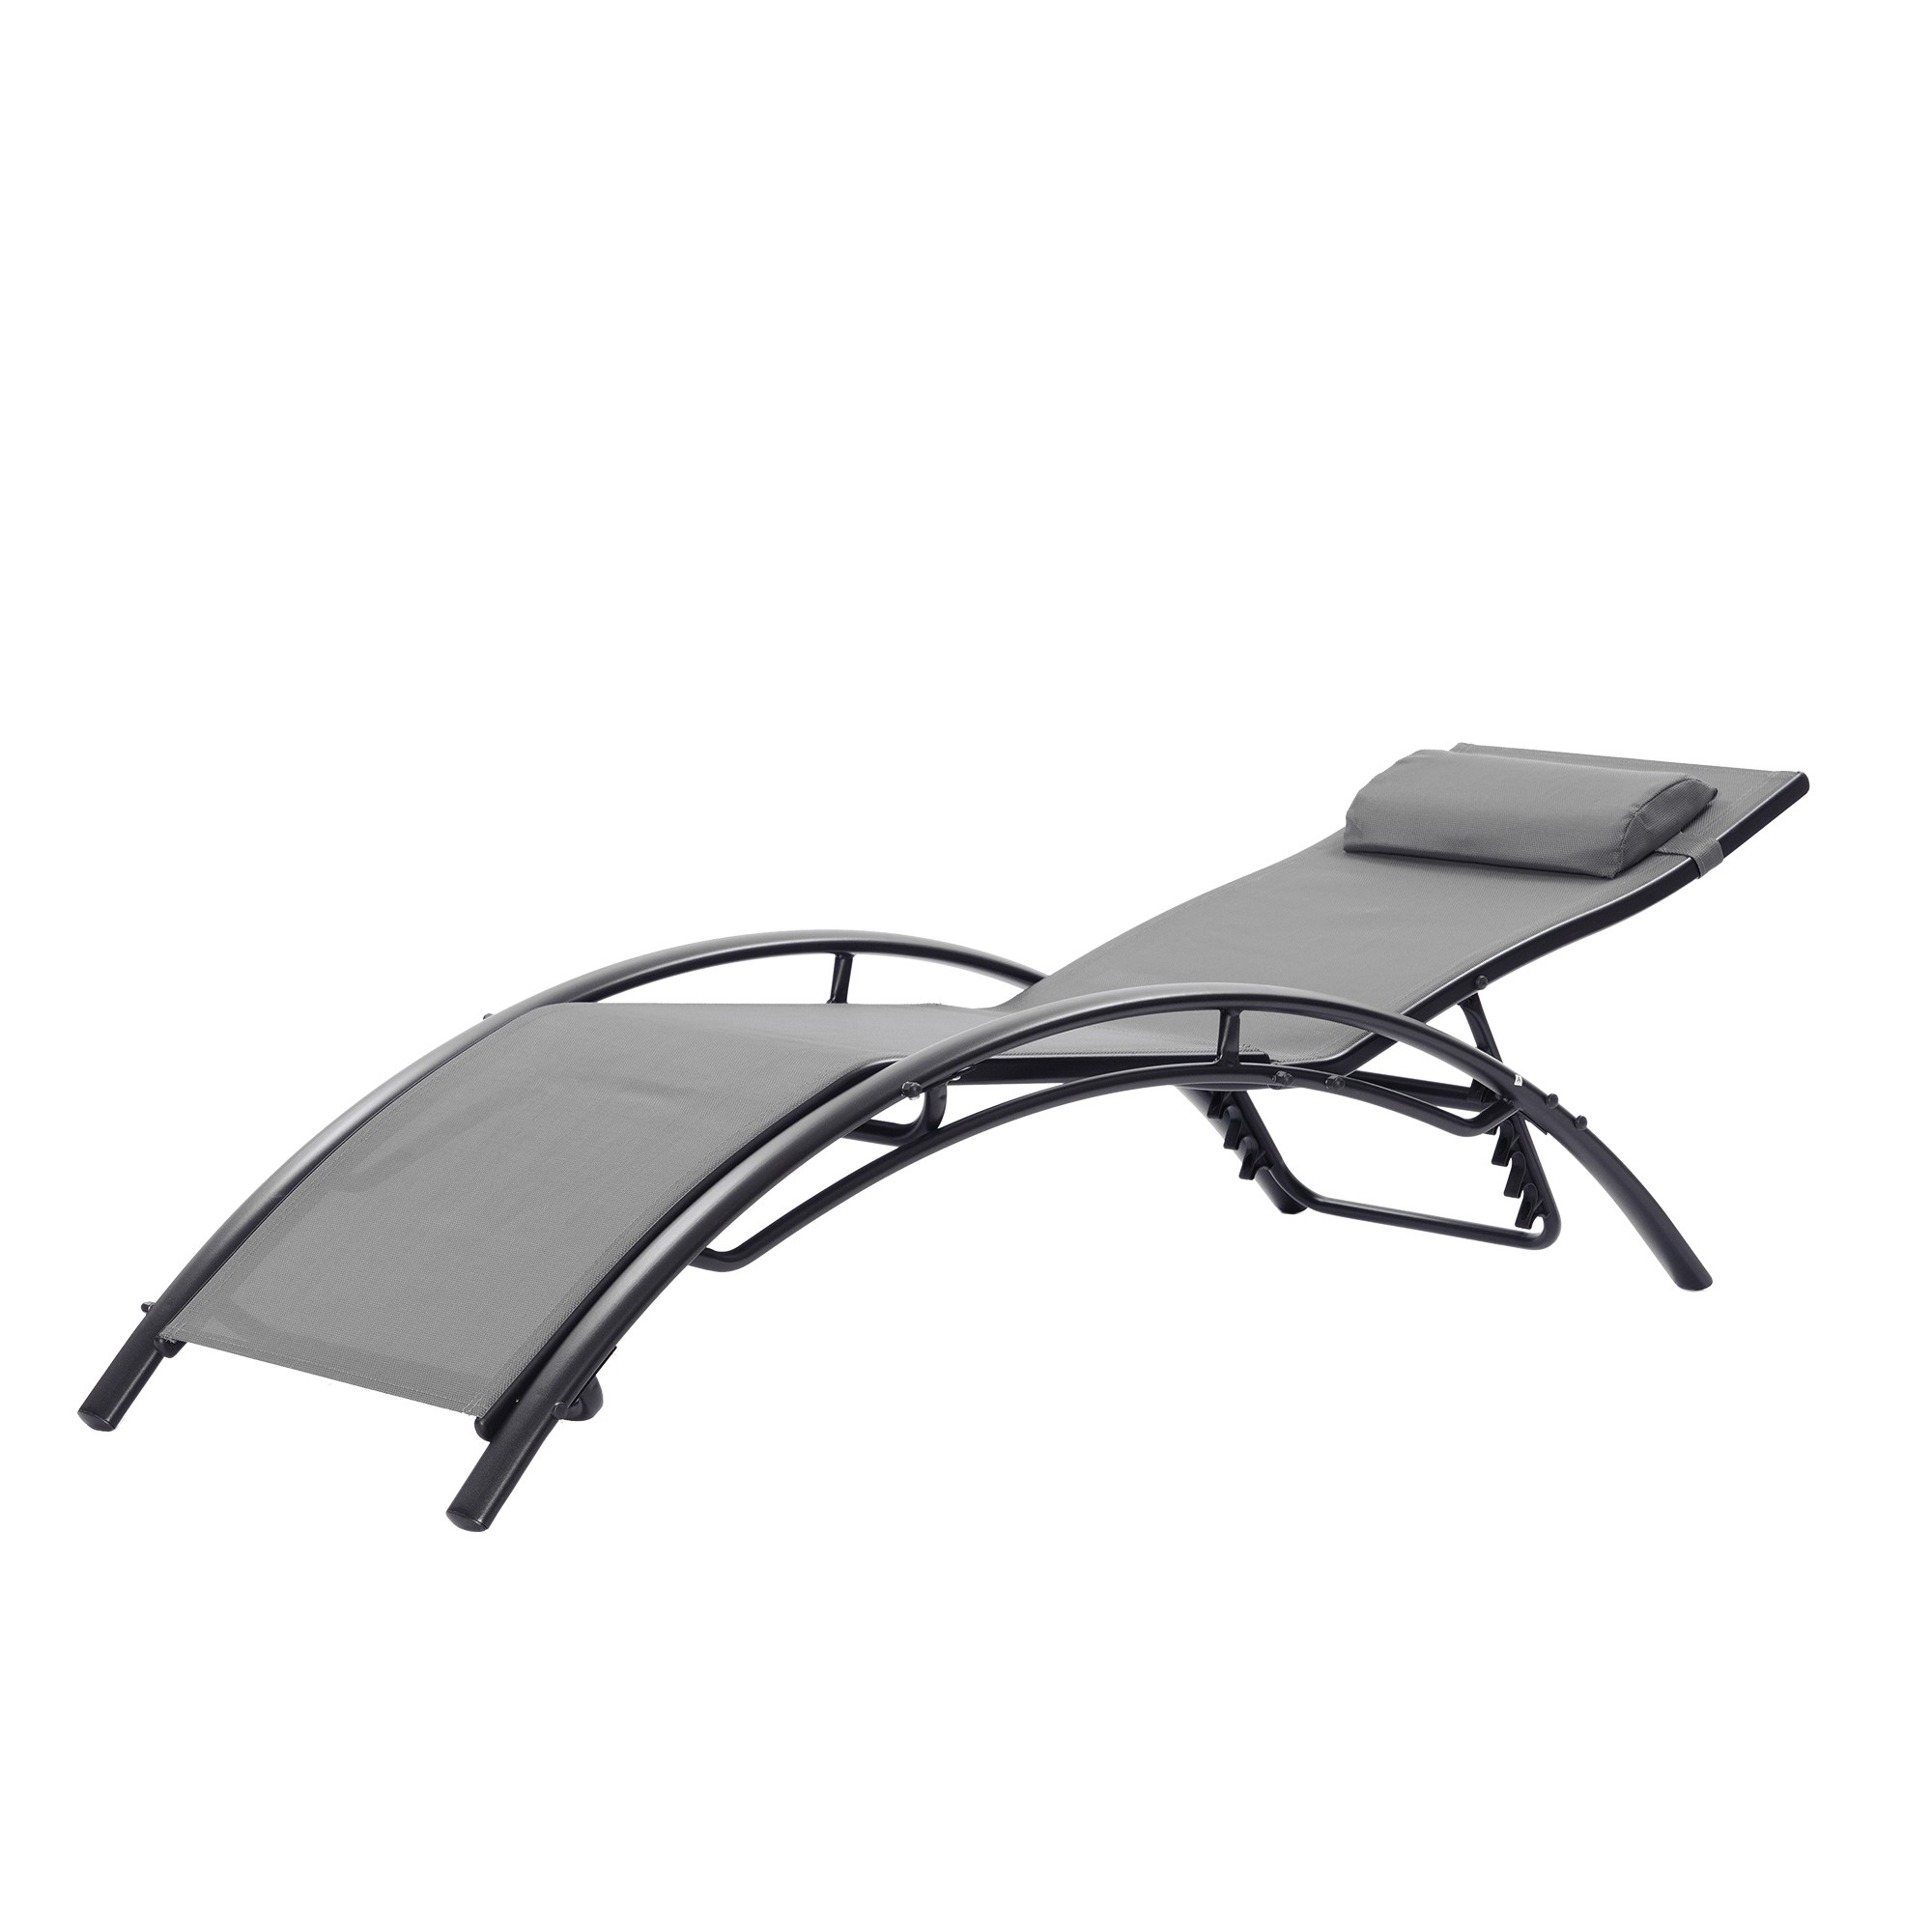 Set of 2, Folding Patio Chaise Lounge Chair for Outside, Aluminum Adjustable Outdoor Pool Recliner Chair, Black Frame (Grey) - image 5 of 5